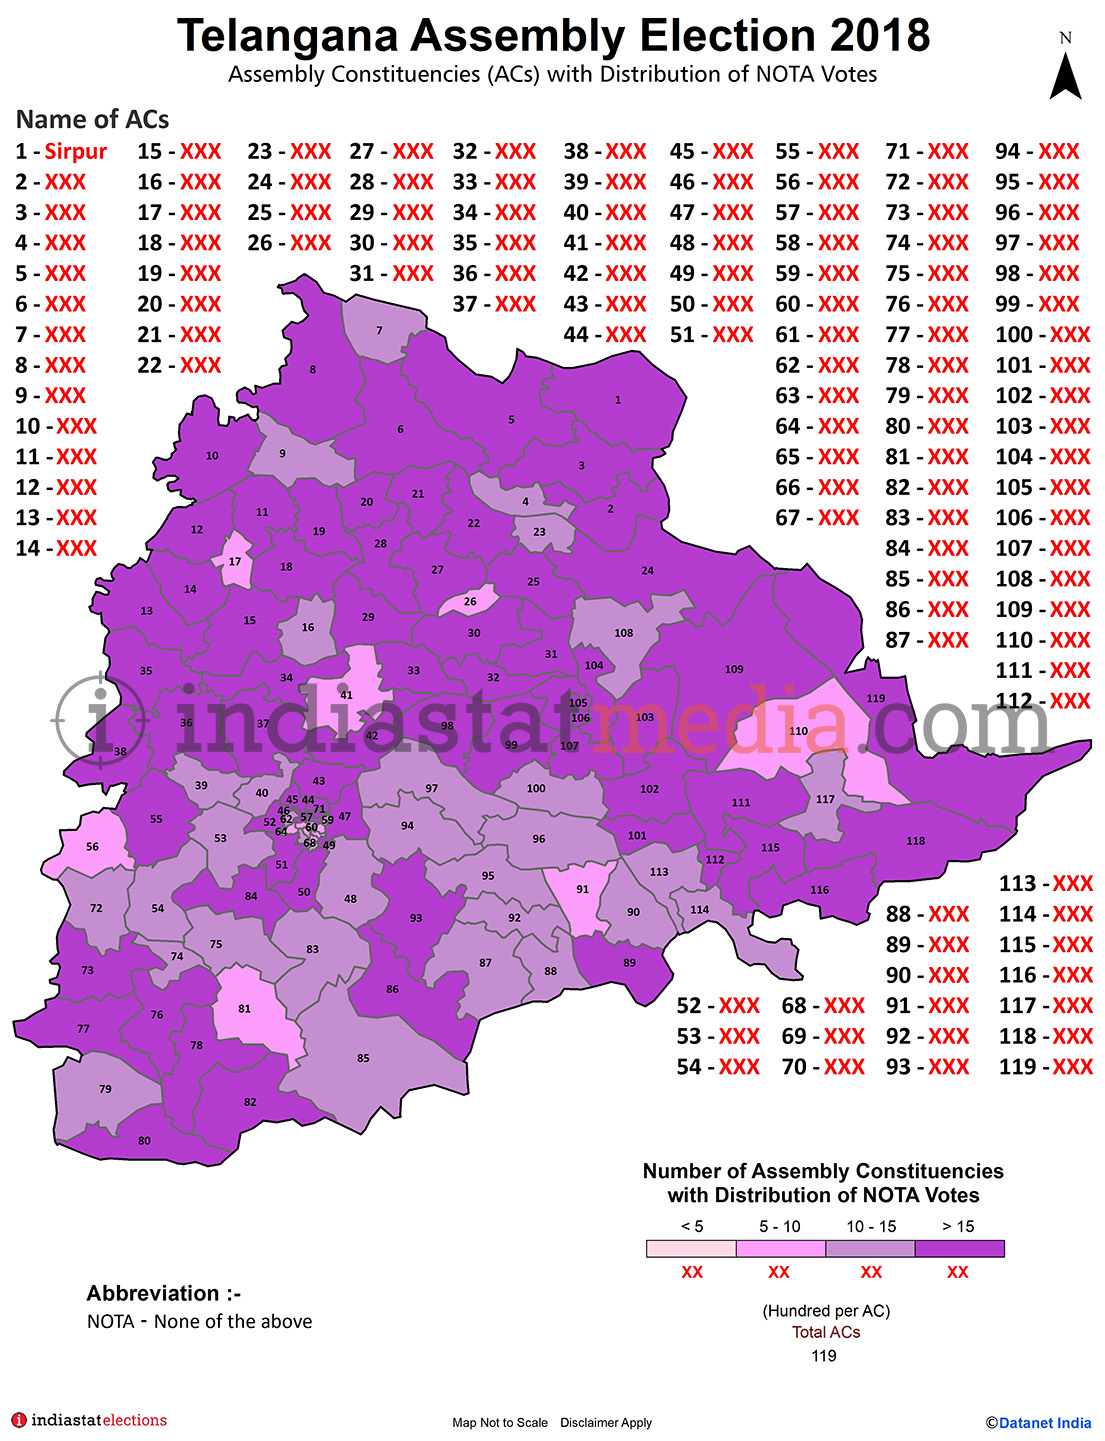 Distribution of NOTA Votes by Constituencies in Telangana (Assembly Election - 2018)